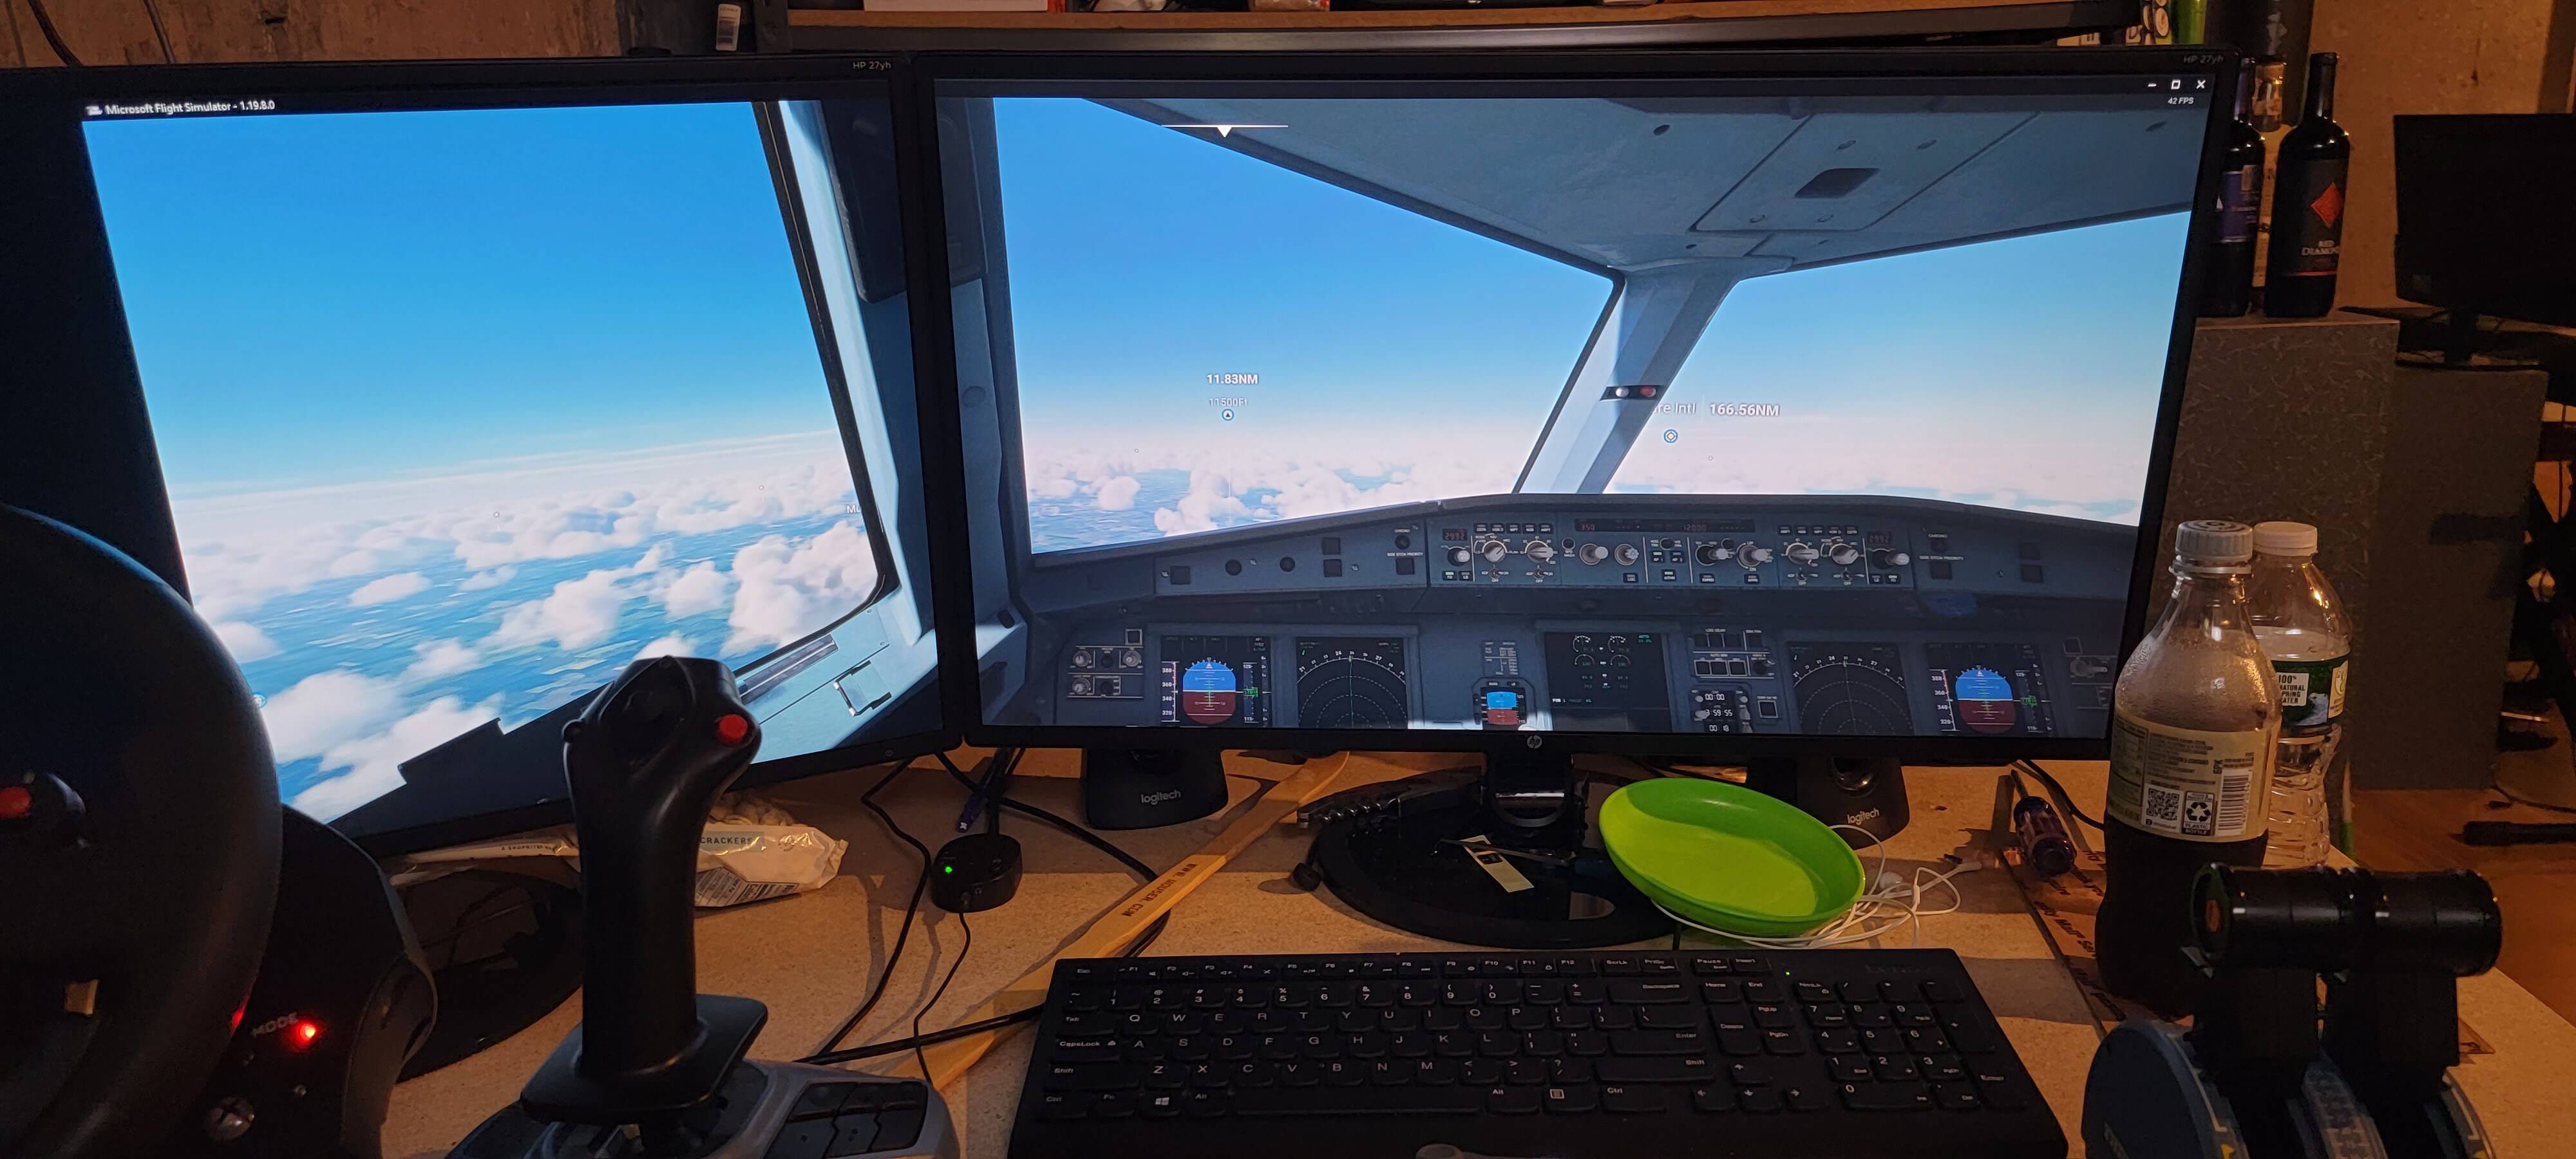 Microsoft Flight Simulator' Size is Cut Down to Just 83GB From its